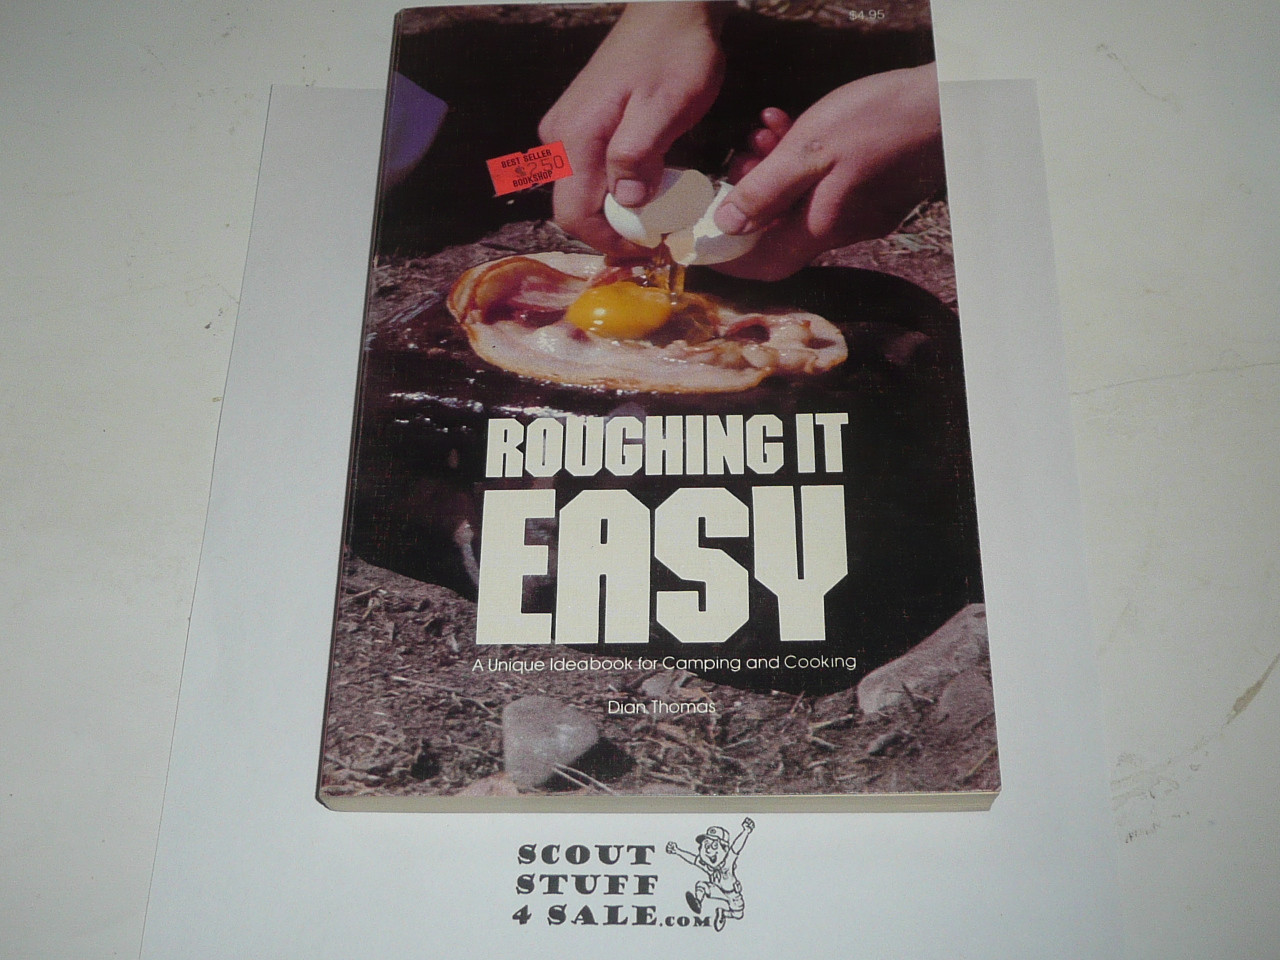 Roughing It Easy, By Dian Thomas, 1975